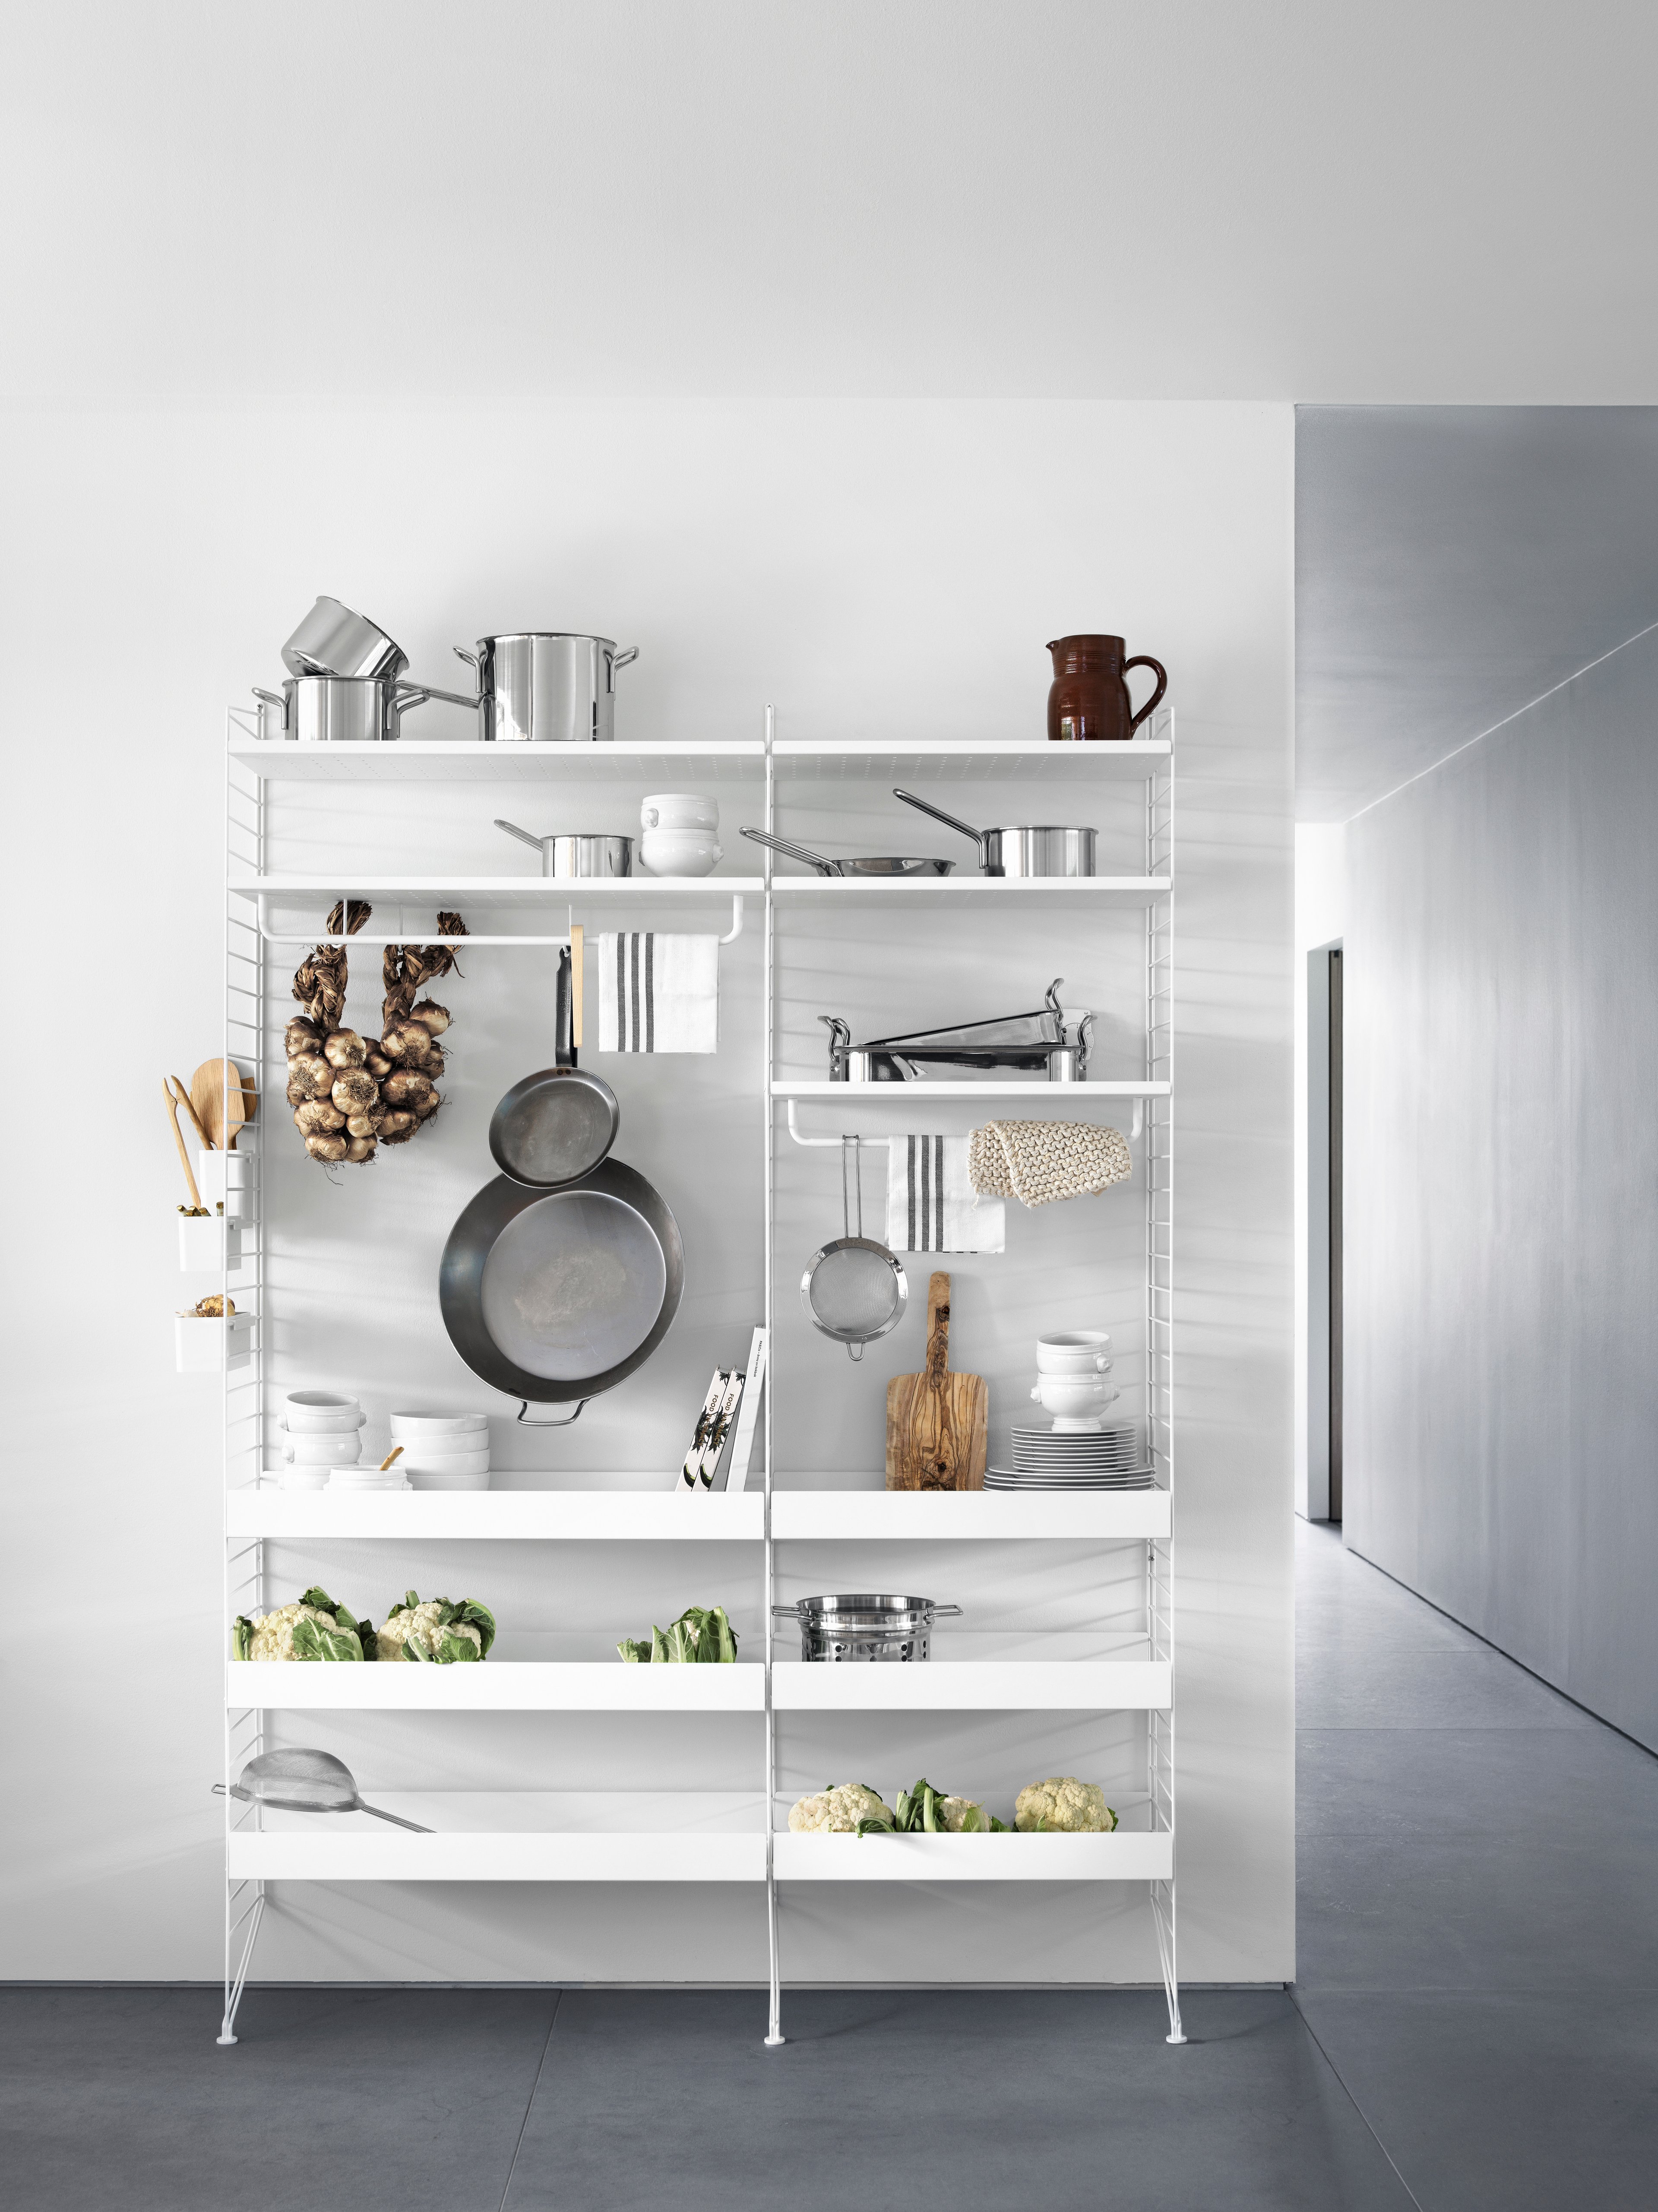 Floor mounted kitchen solution from String. Floor panels, metal shelves high and metal shelves low in white. Rods, hooks and organizers in white.